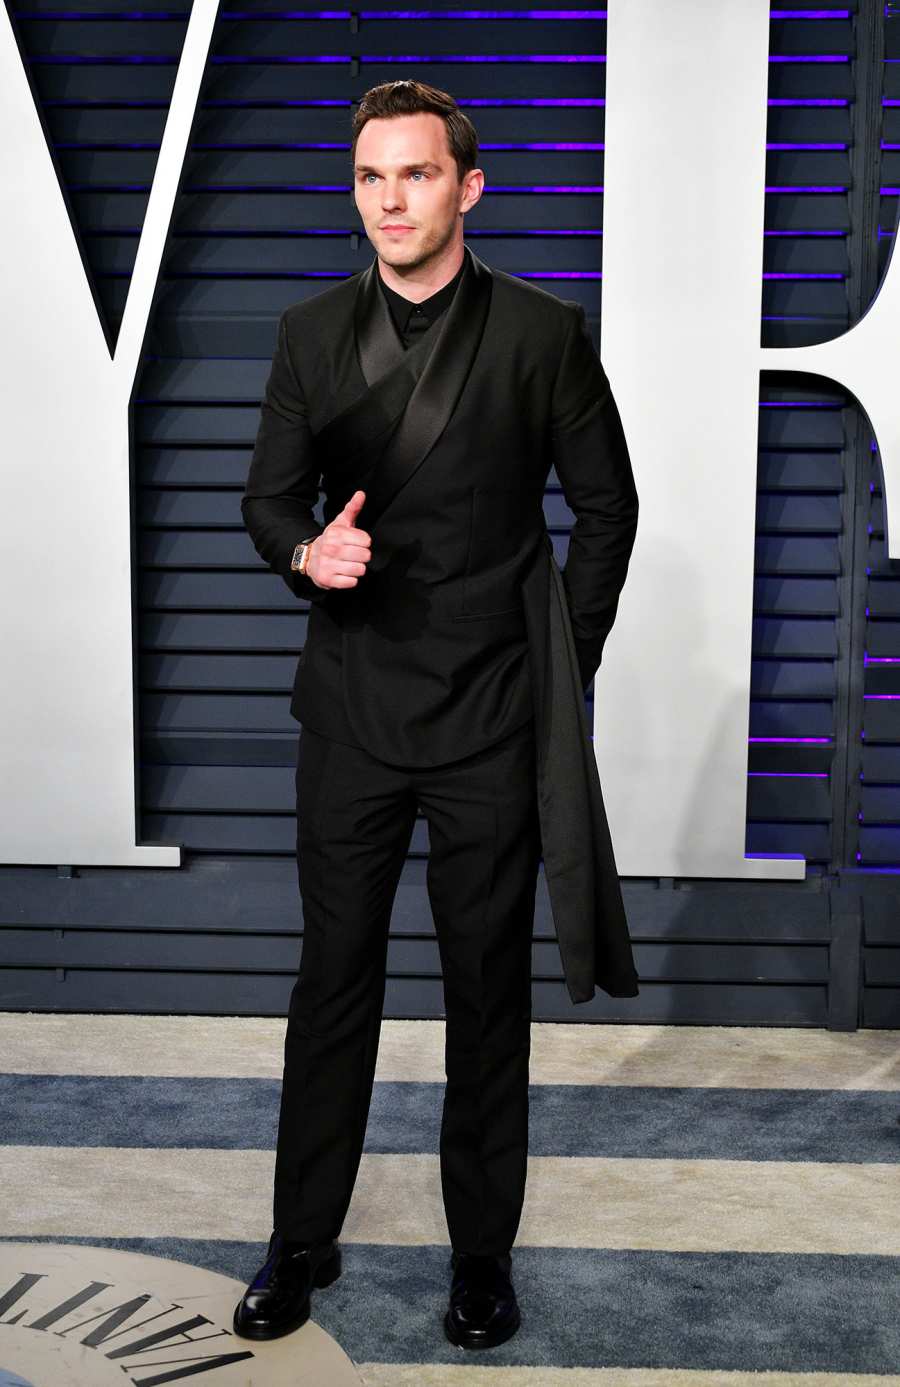 Nicholas Hoult Hottest Hunks at the 2019 Oscars